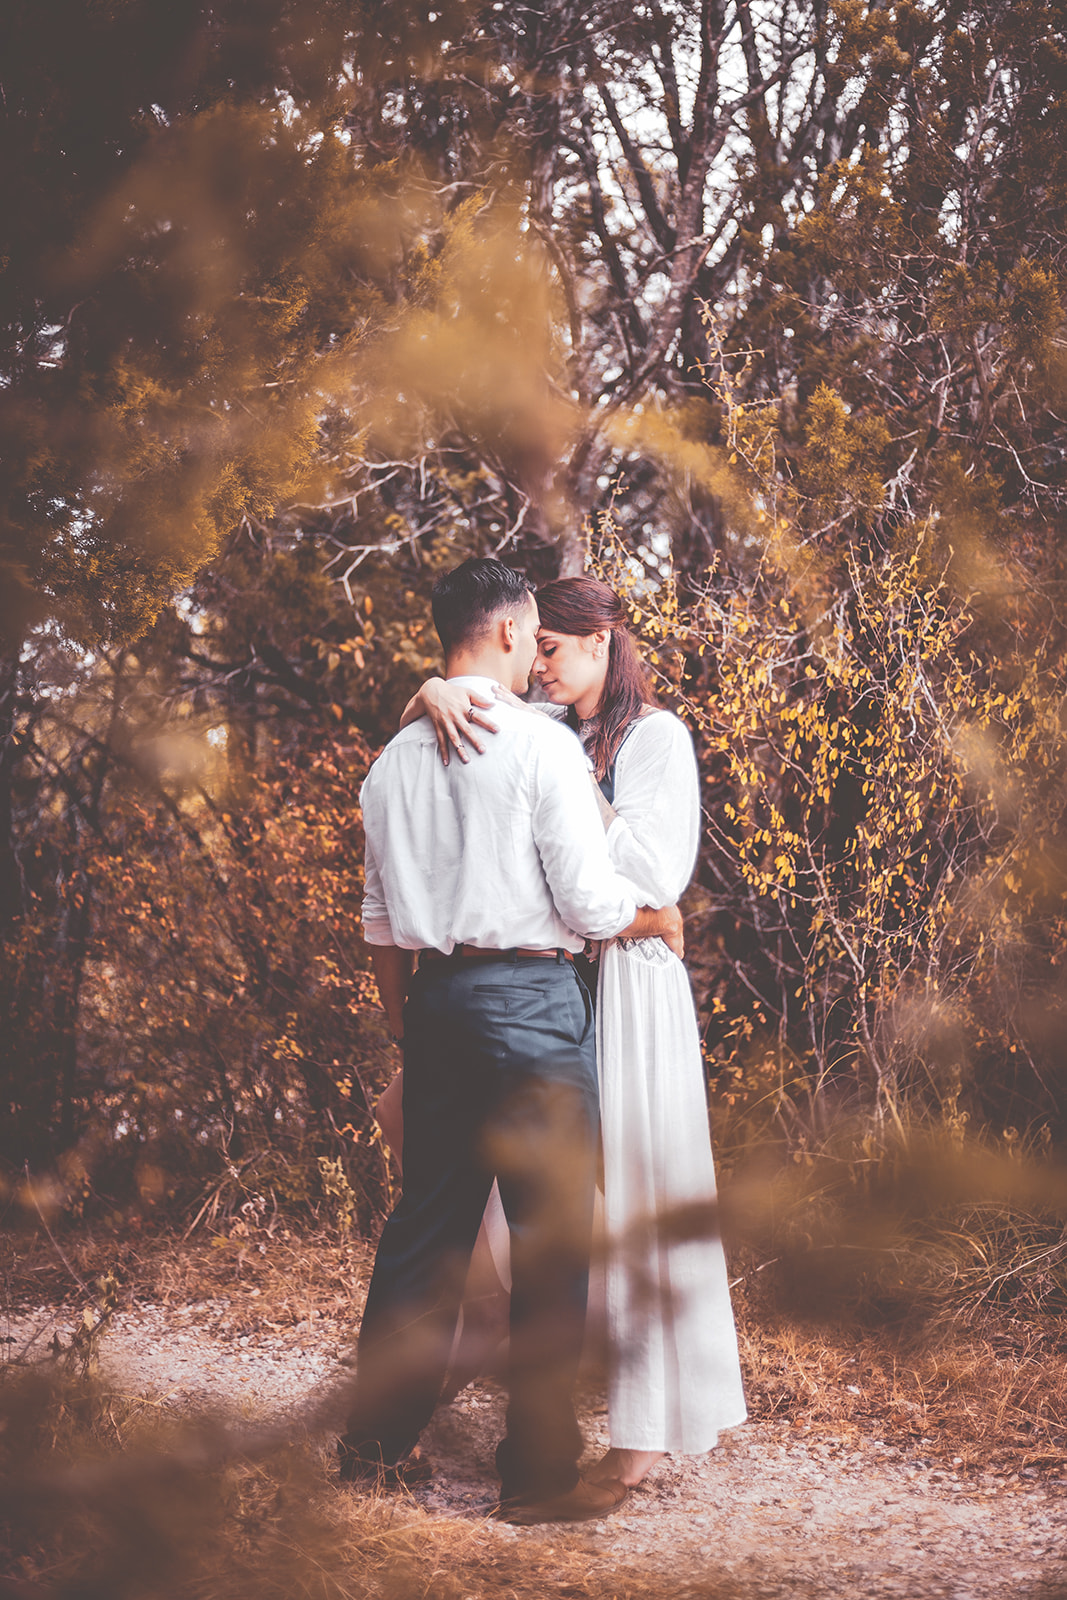 A Texas couple in wedding attire snuggling under autumn branches after their elopement